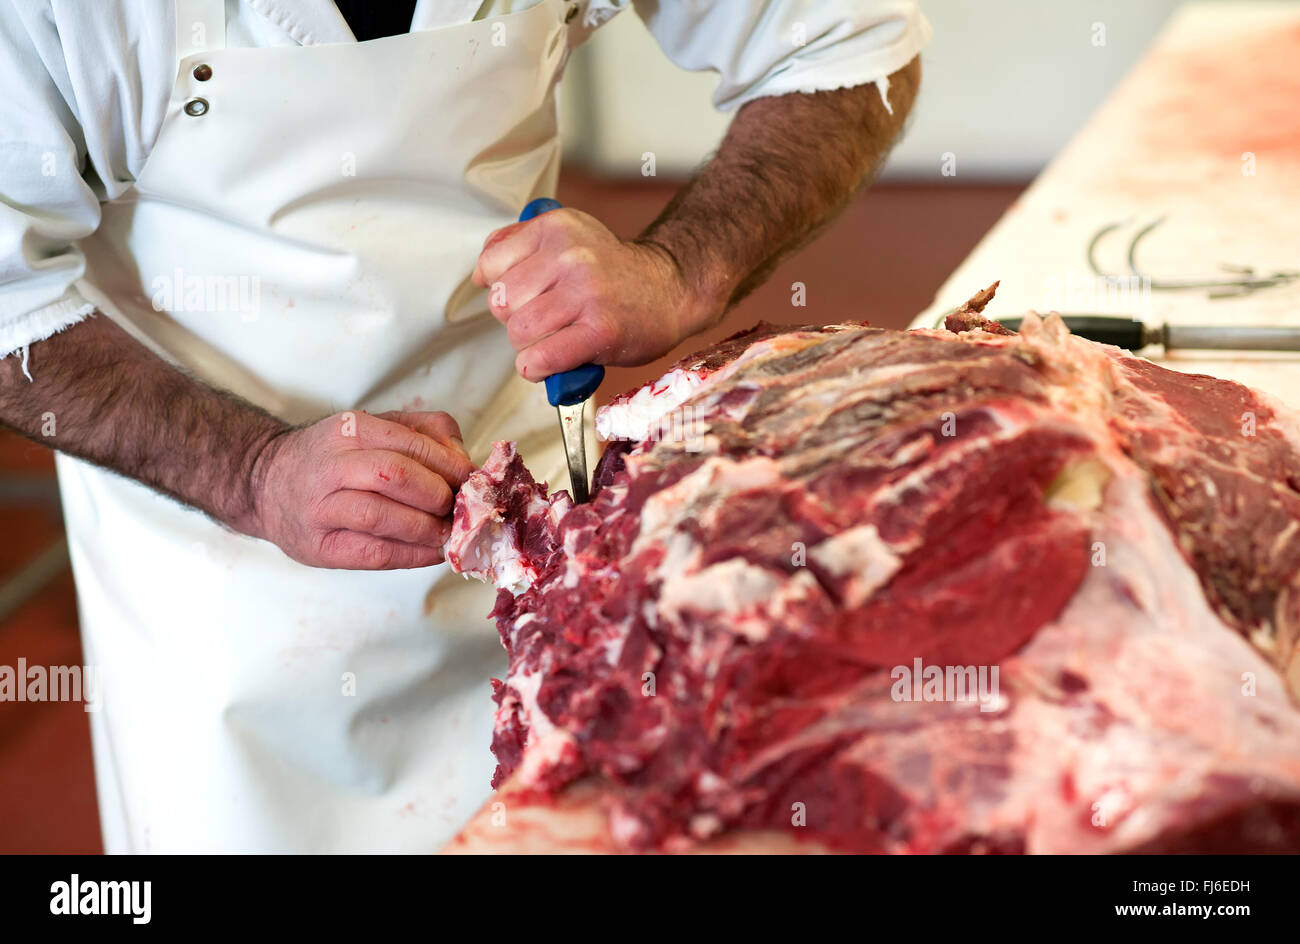 Butcher cutting up a large slab of raw meat off a carcass with a knife Stock Photo